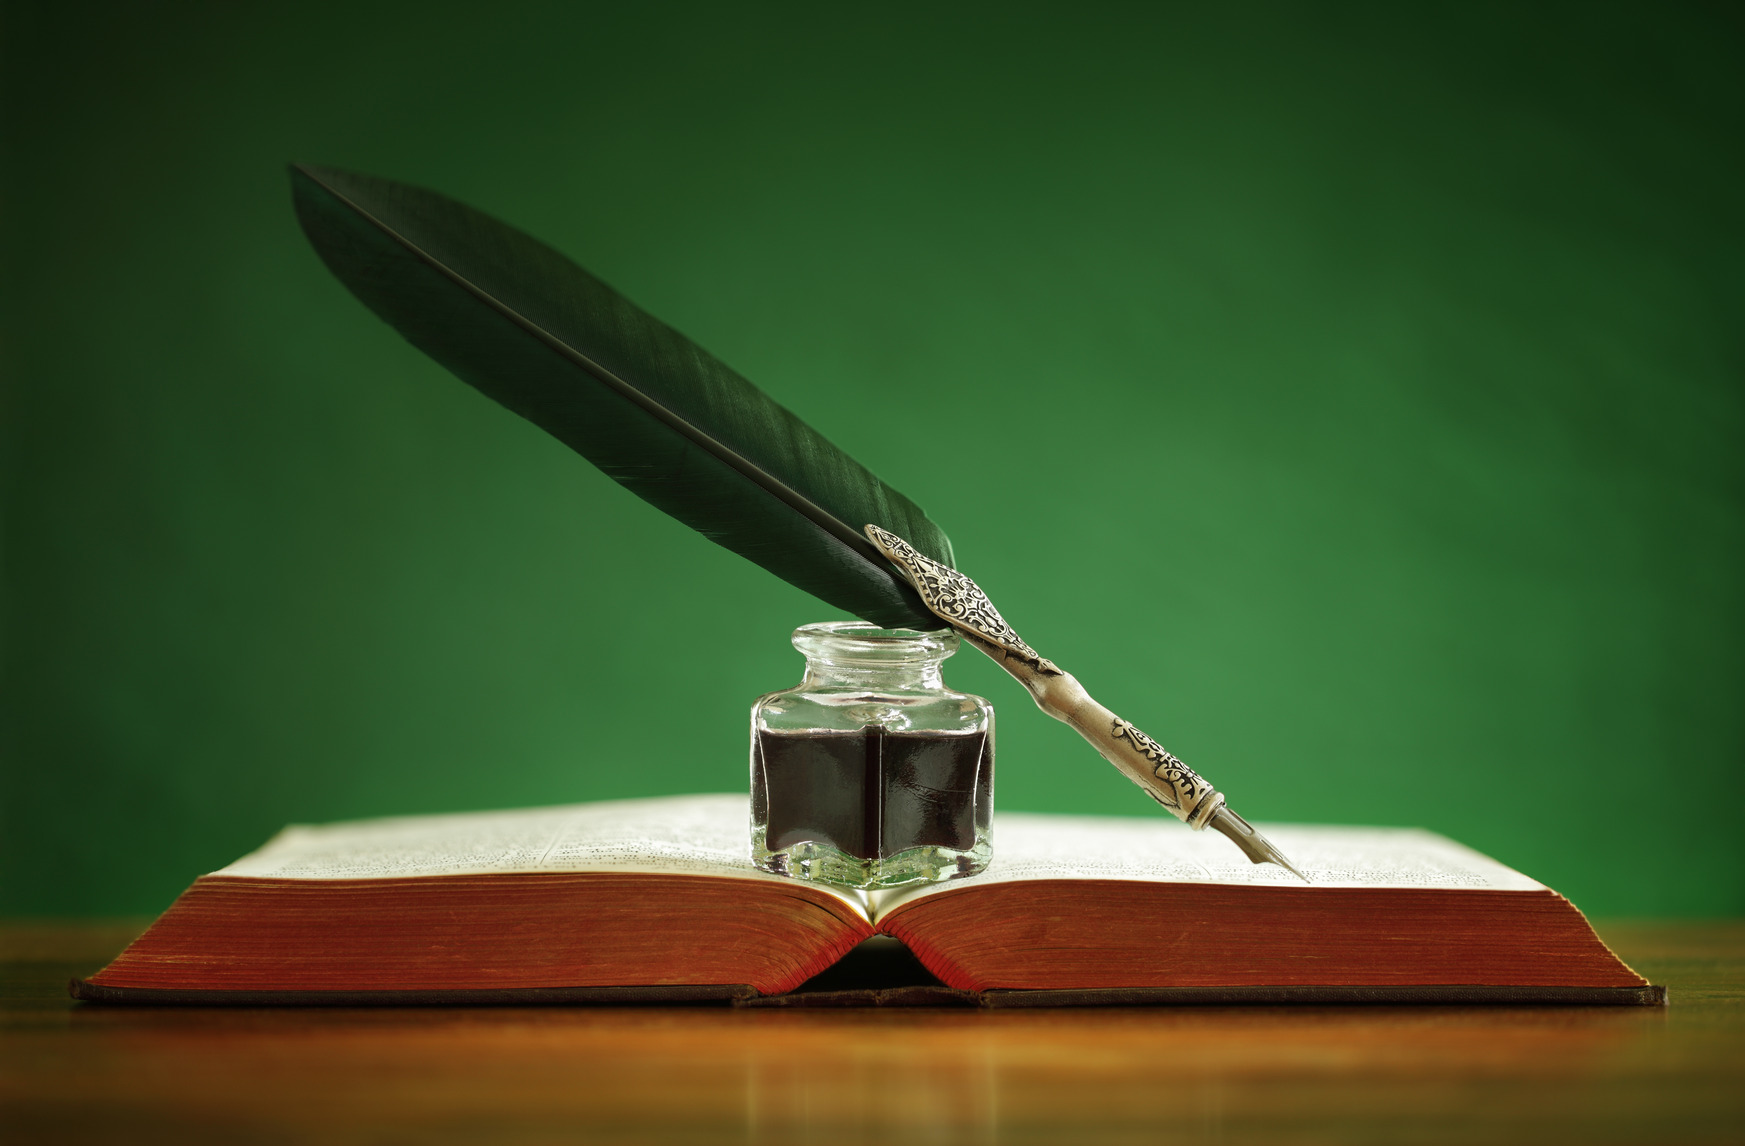 quill-pen-and-inkwell-on-old-book-m